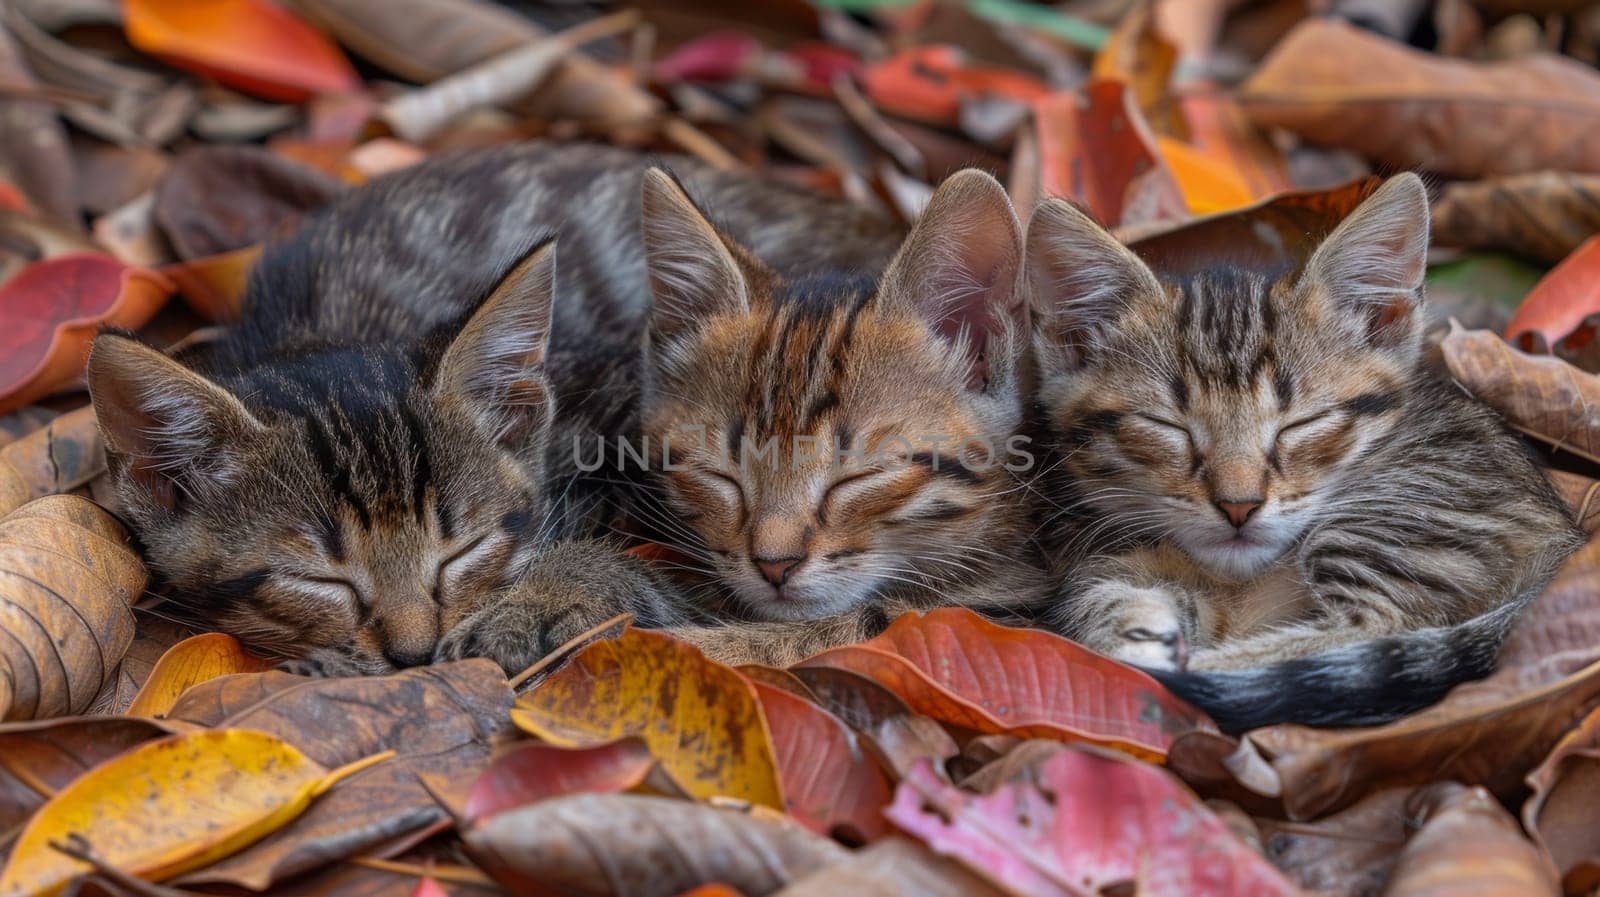 Three kittens sleeping in a pile of leaves on the ground